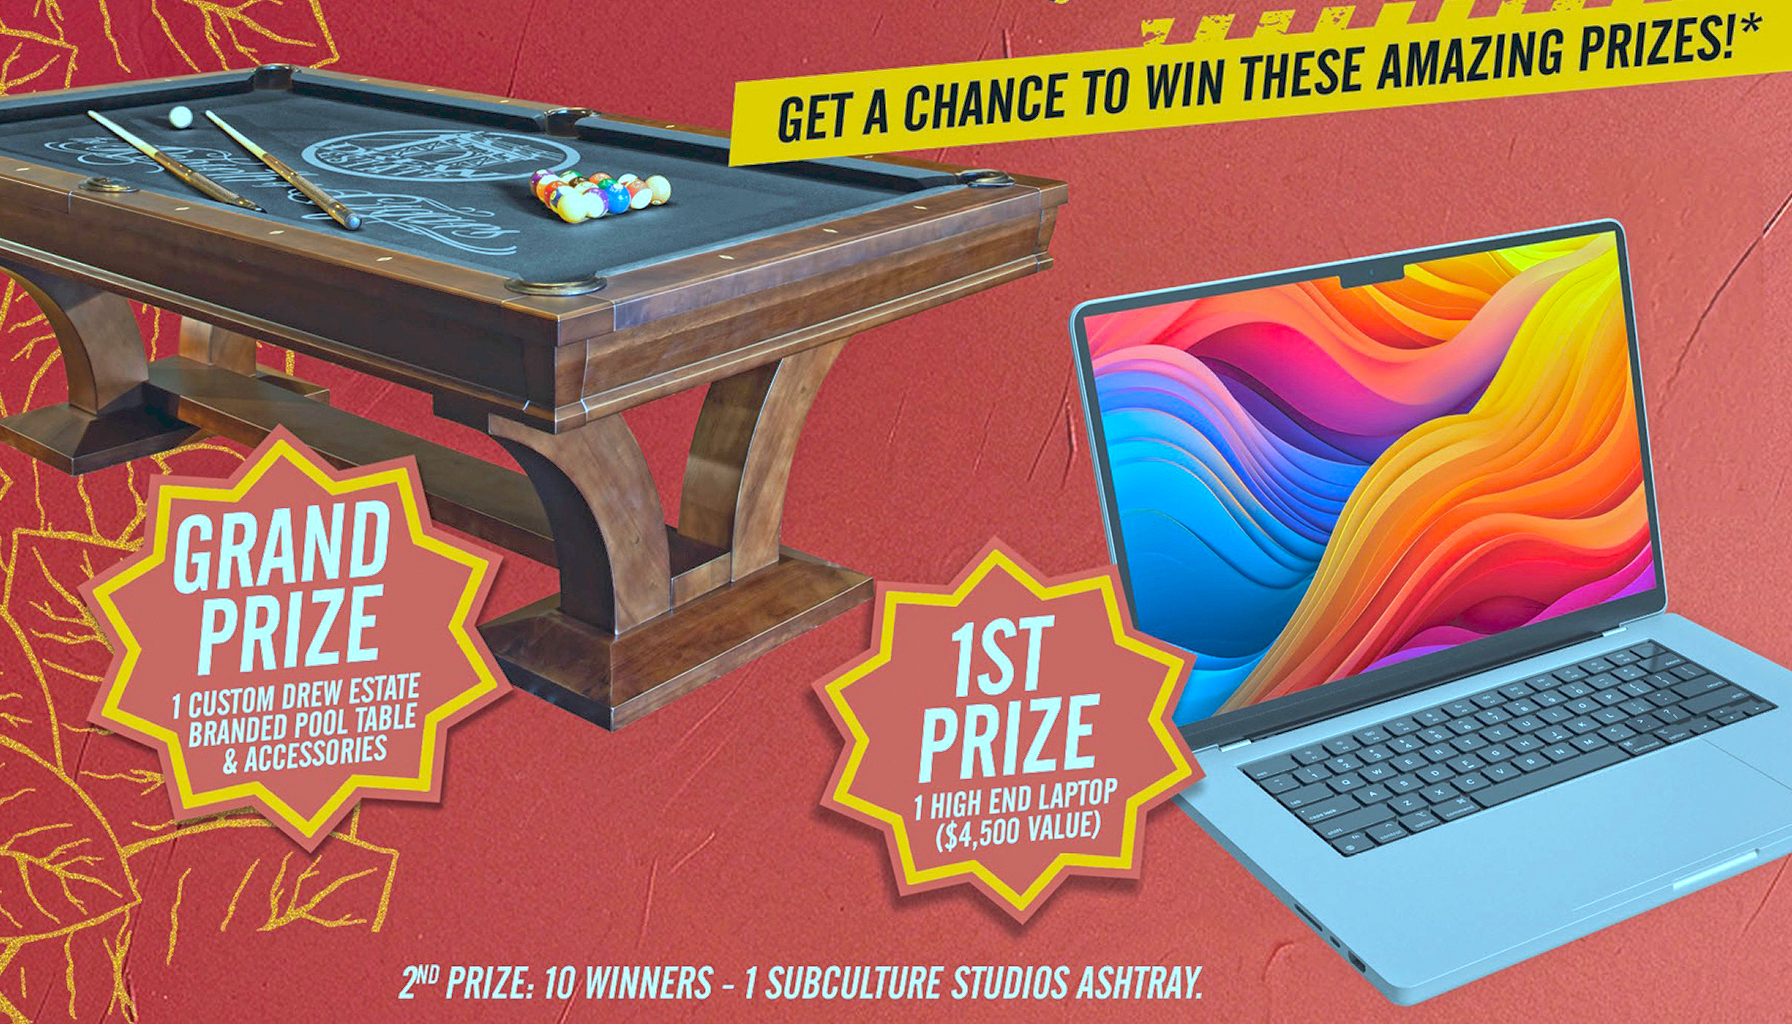 Get the Chance to win these amazing prizes